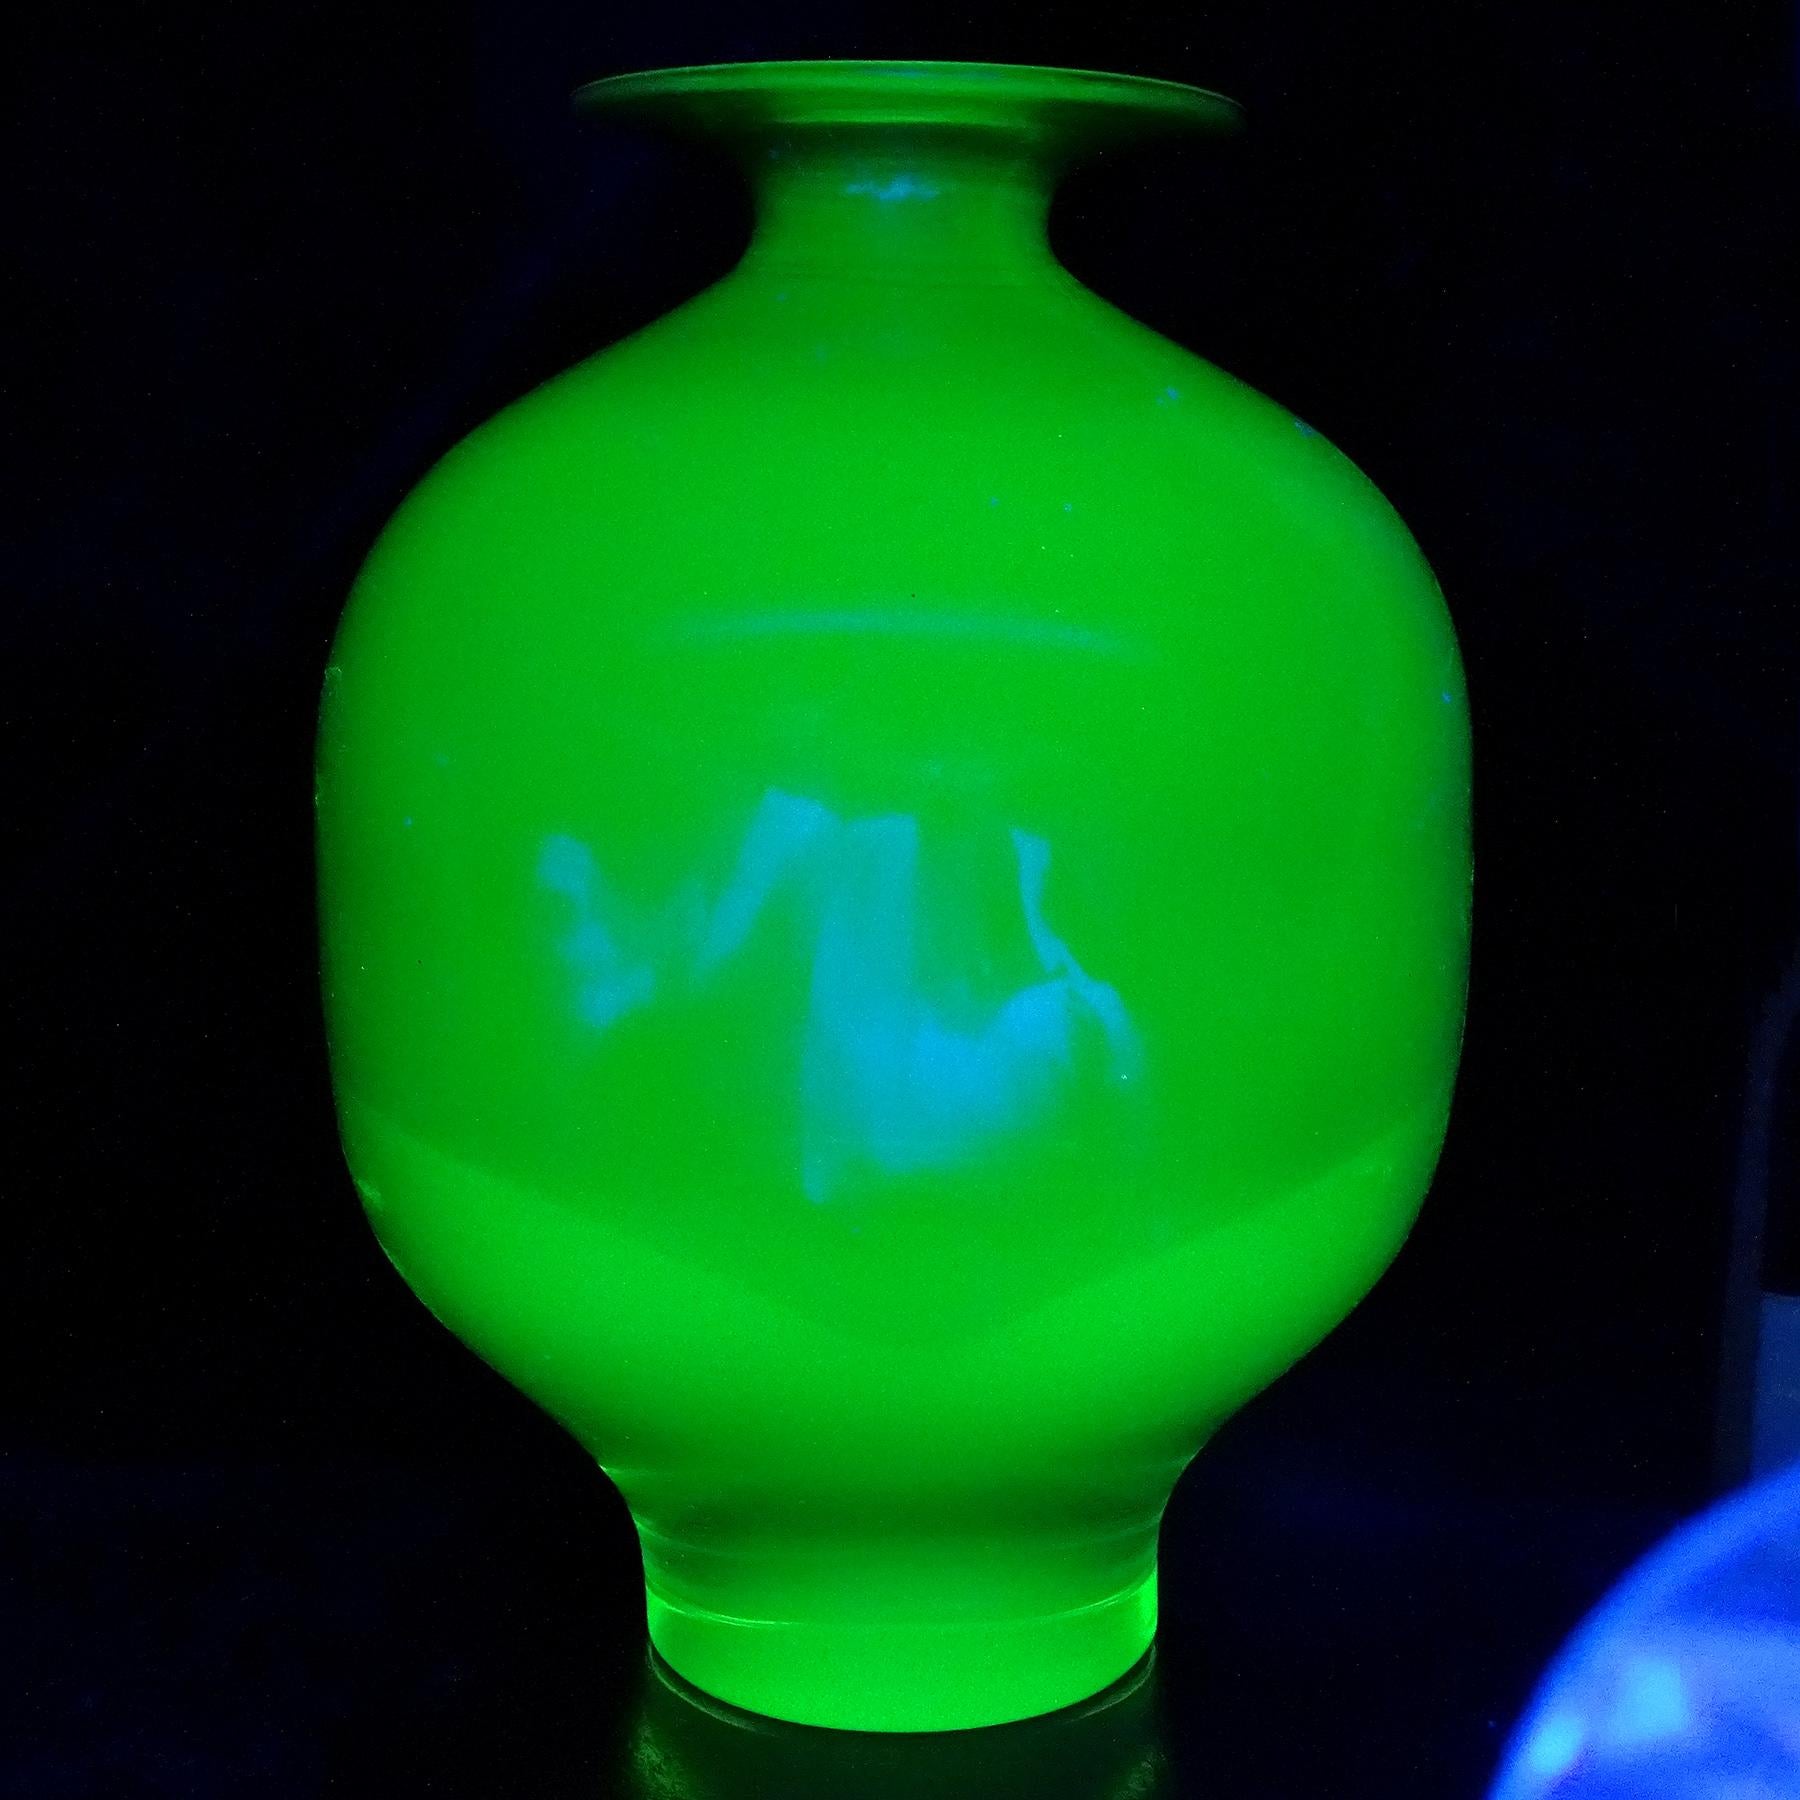 Beautiful vintage Murano hand blown Sommerso glowing green over olive green Italian art glass decorative flower vase. Documented to the designer Antonio da Ros (Italian, 1936-2012) for Vetreria Gino Cenedese. According to the previous owner, the